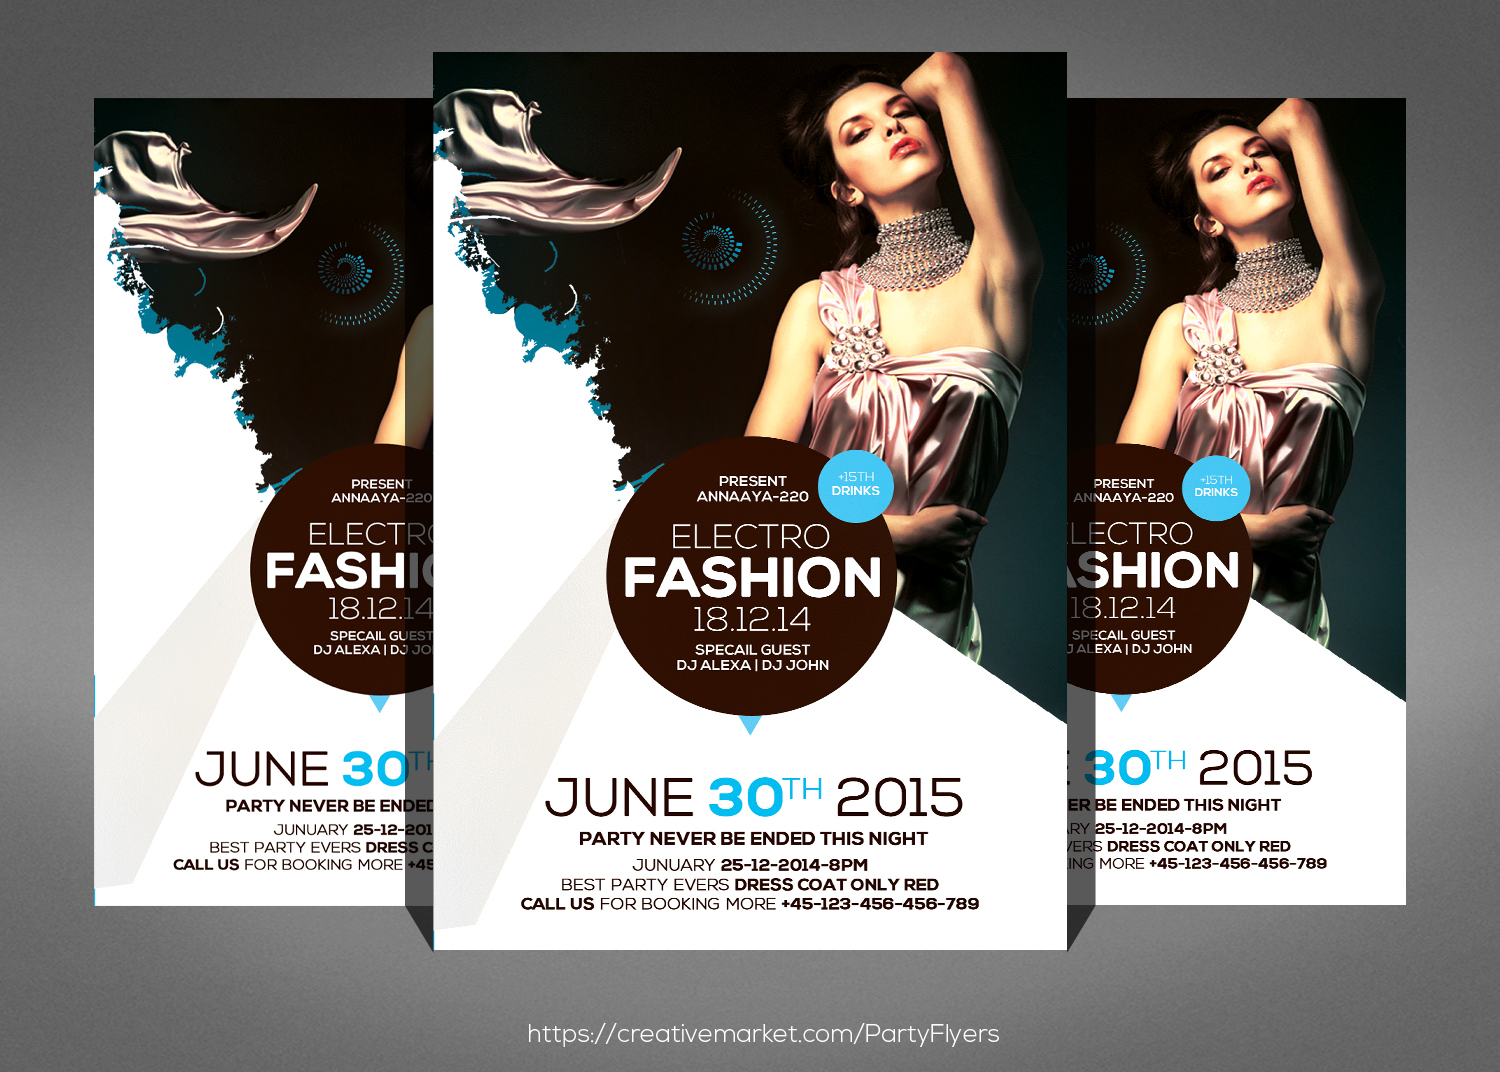 Template 25+ Best Fashion Flyer PSD Templates & Designs Download